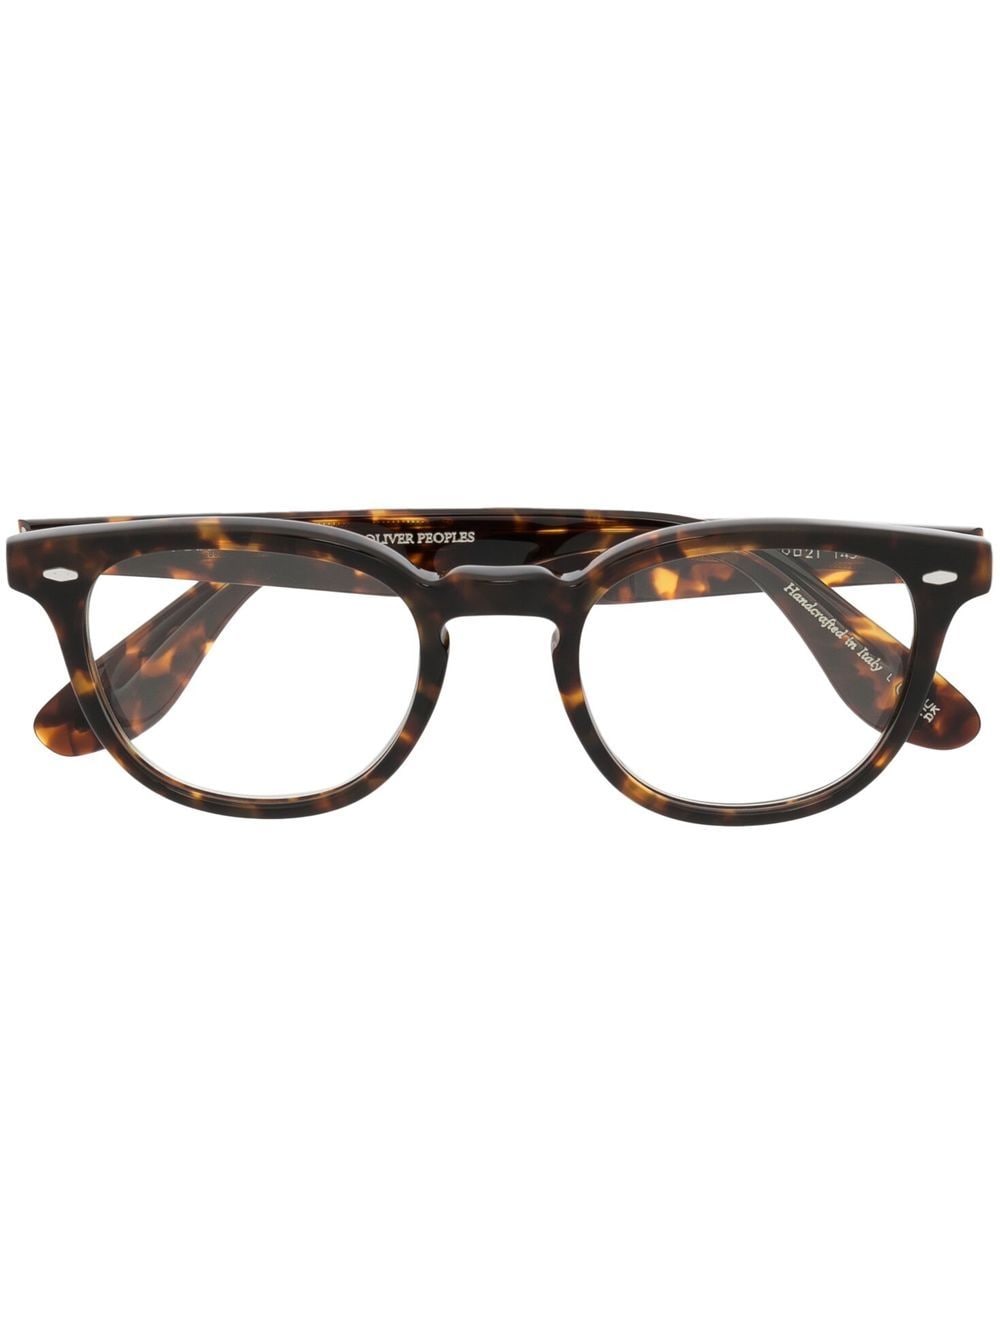 Oliver Peoples tortoiseshell-effect square glasses - Brown von Oliver Peoples